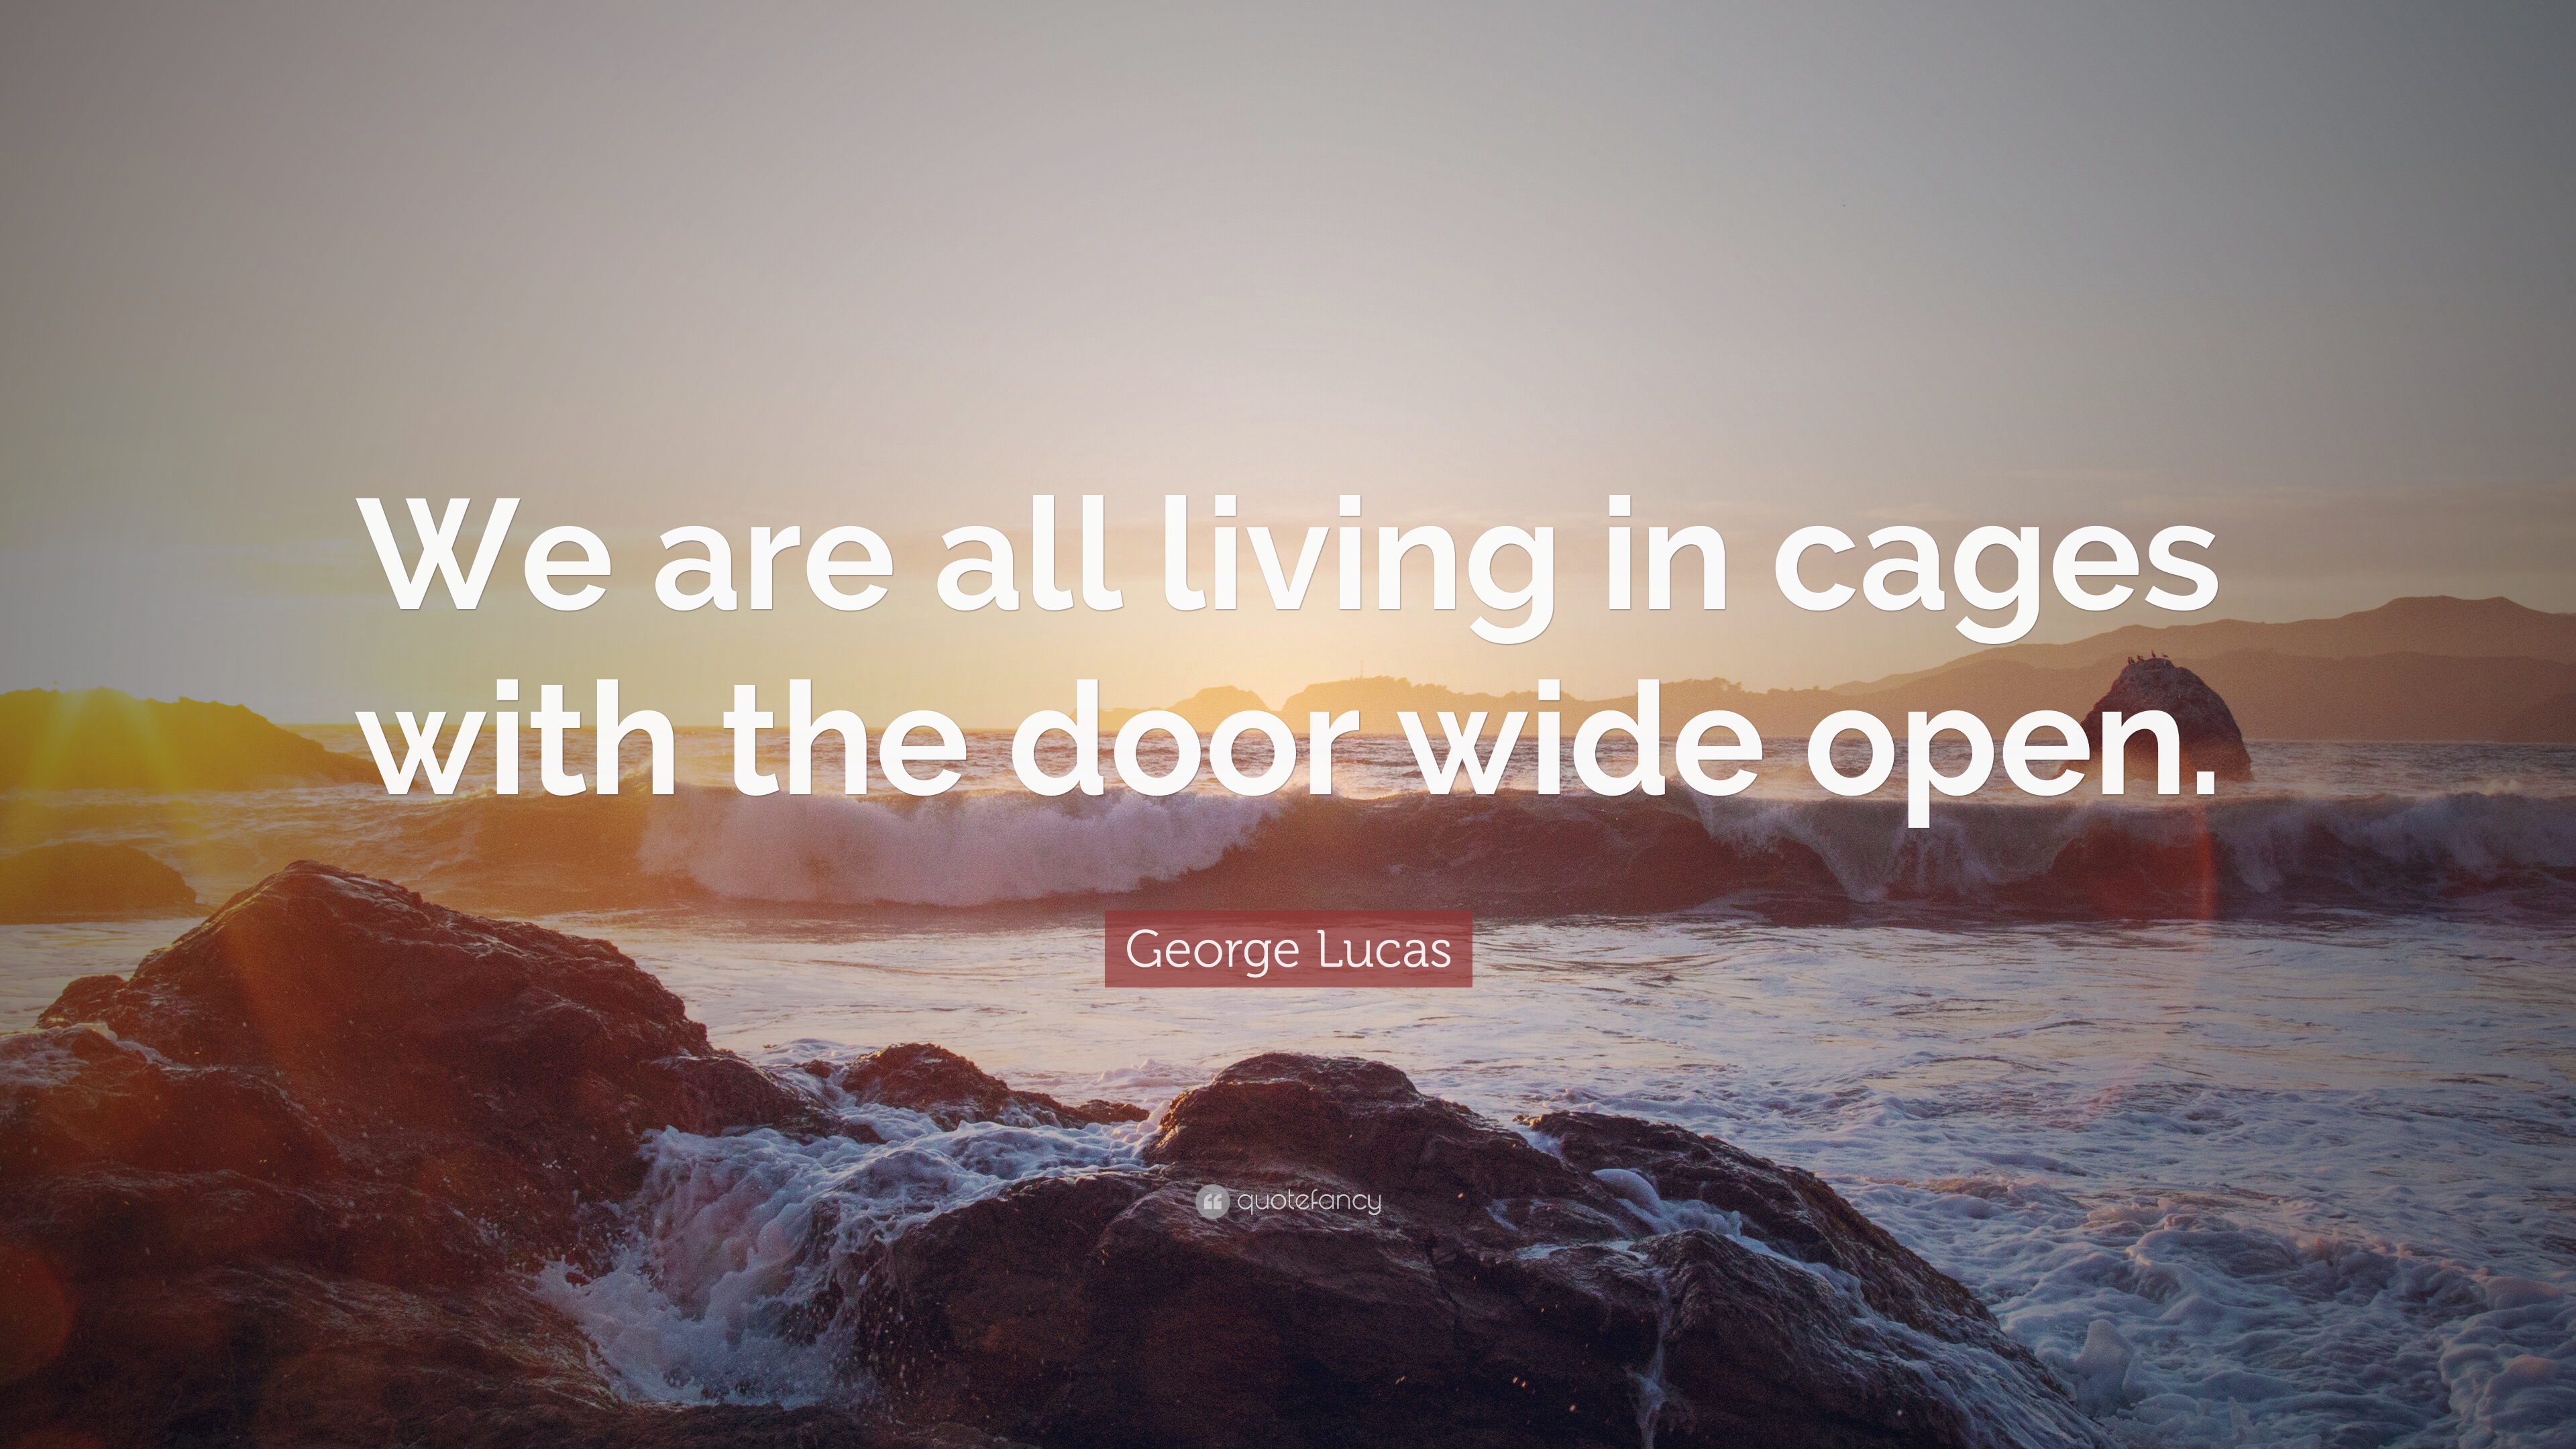 George Lucas Quote: "We are all living in cages with the 